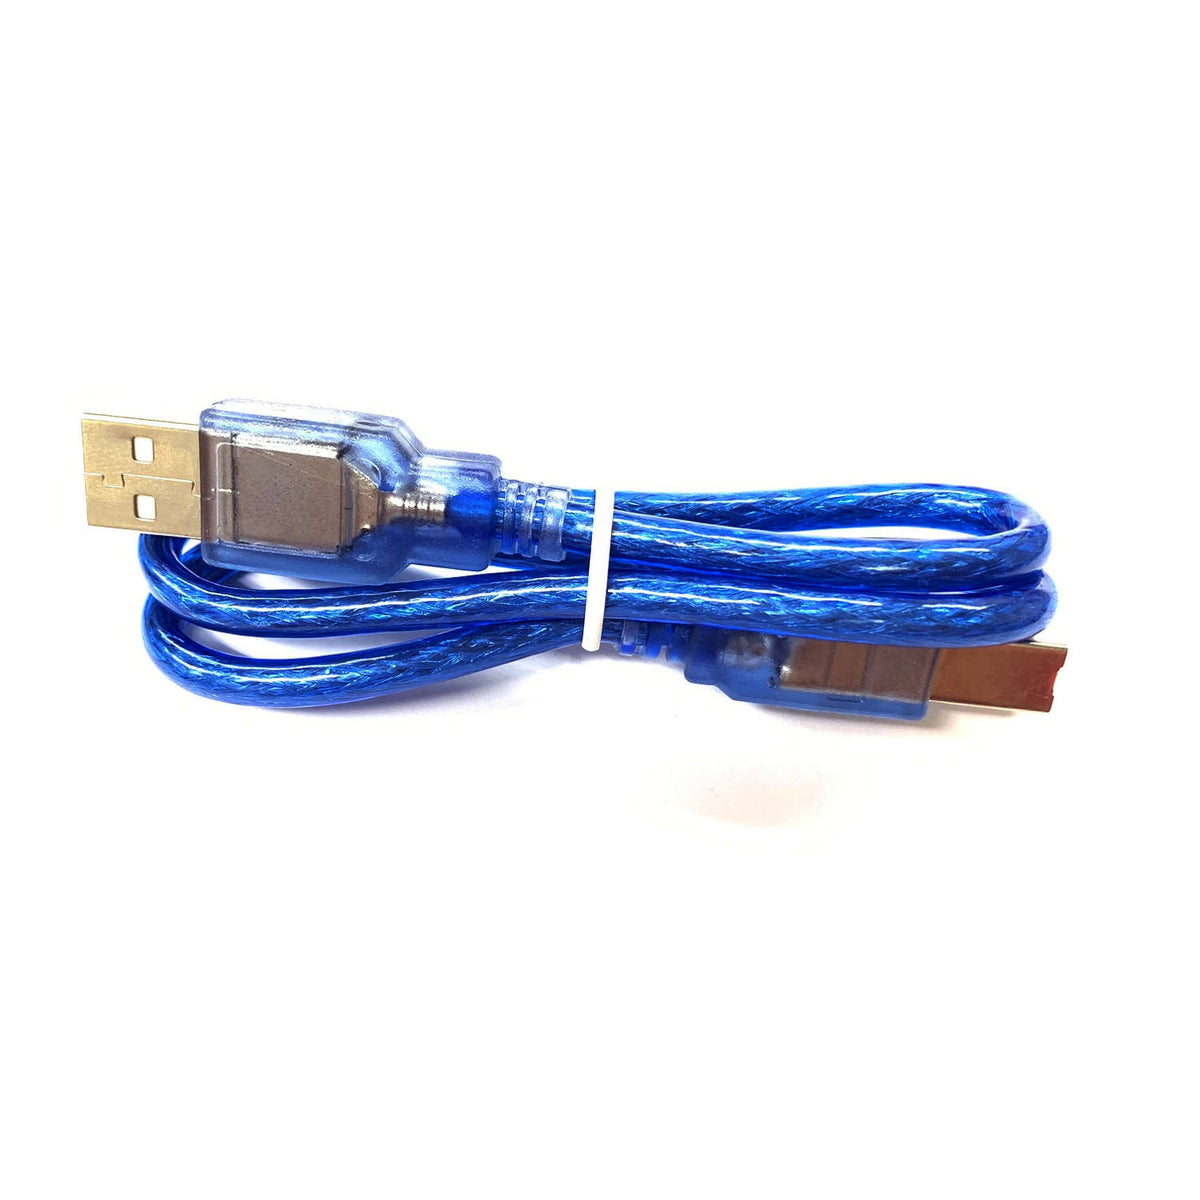 MEGA 2560 R3 with USB Cable (Arduino Compatible) in Canada Robotix